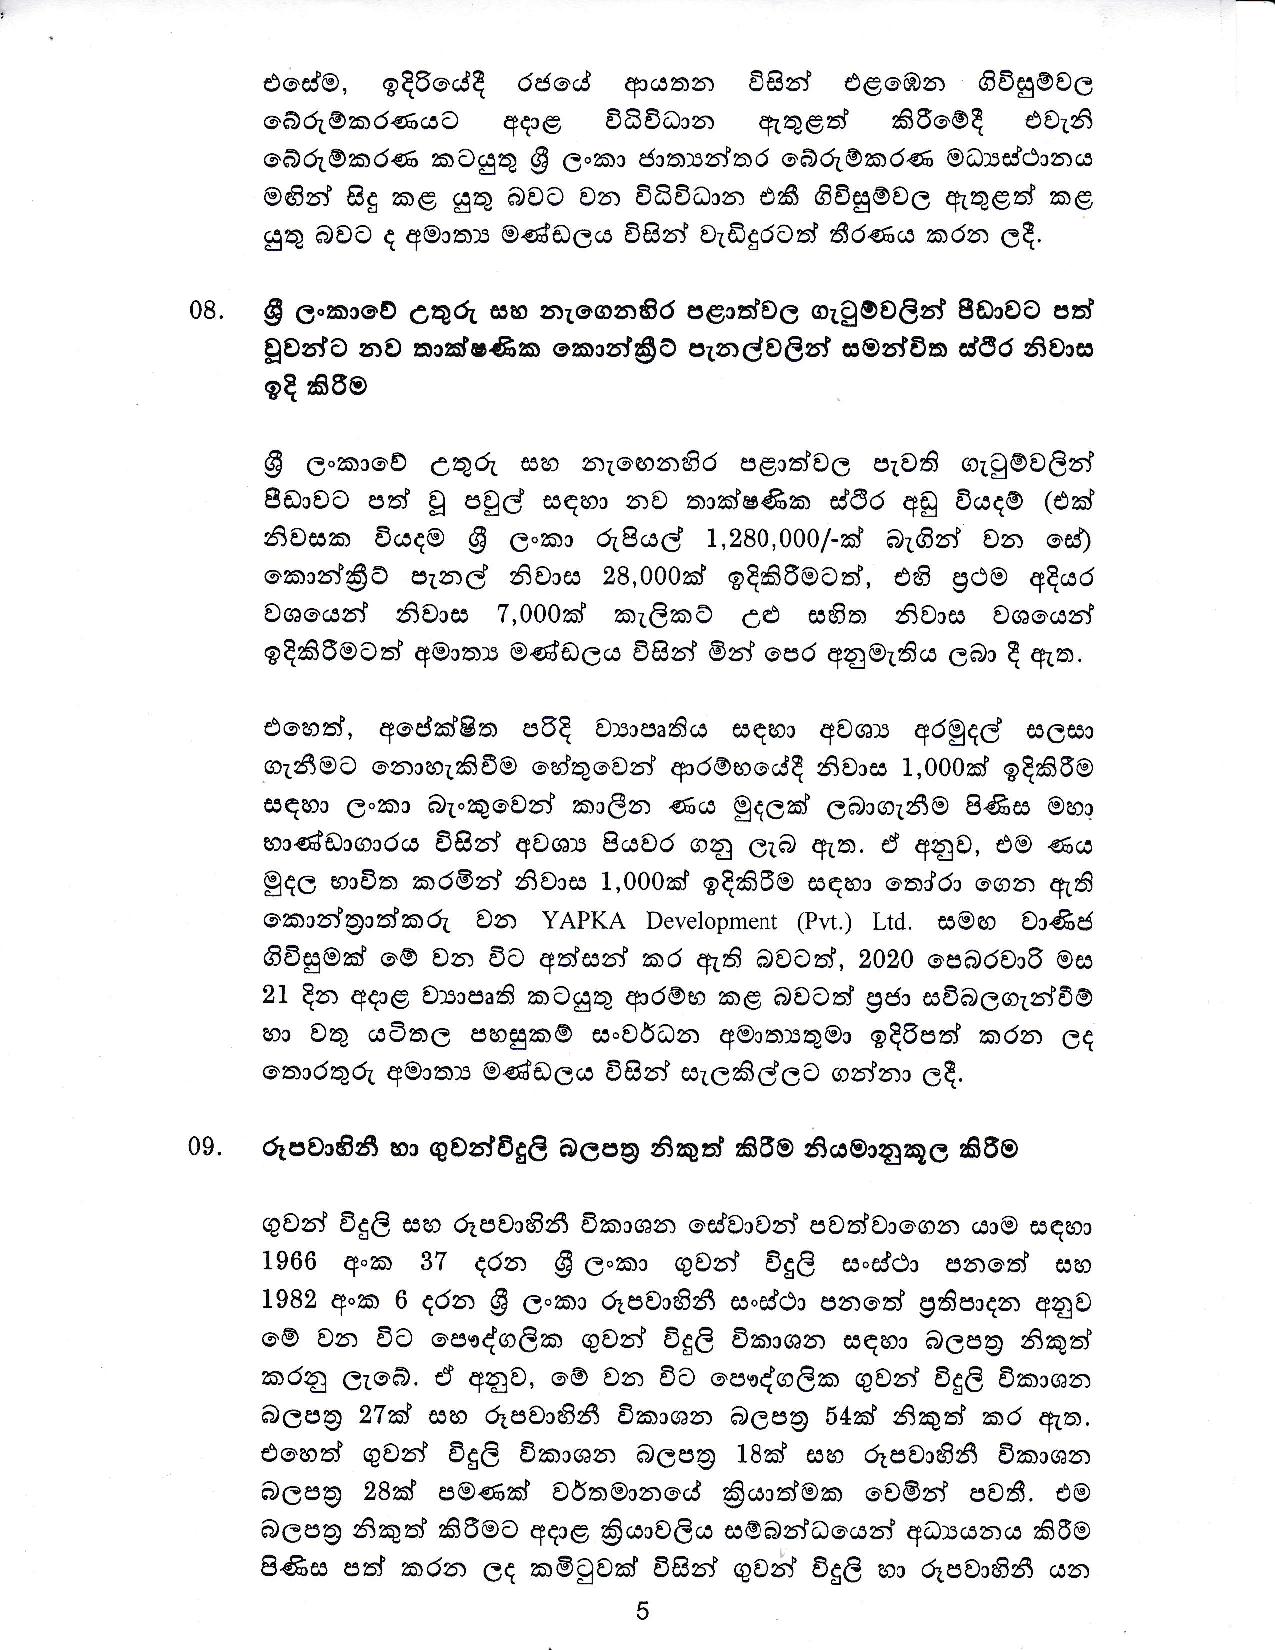 Cabinet Decision on 04.03.2020 page 005